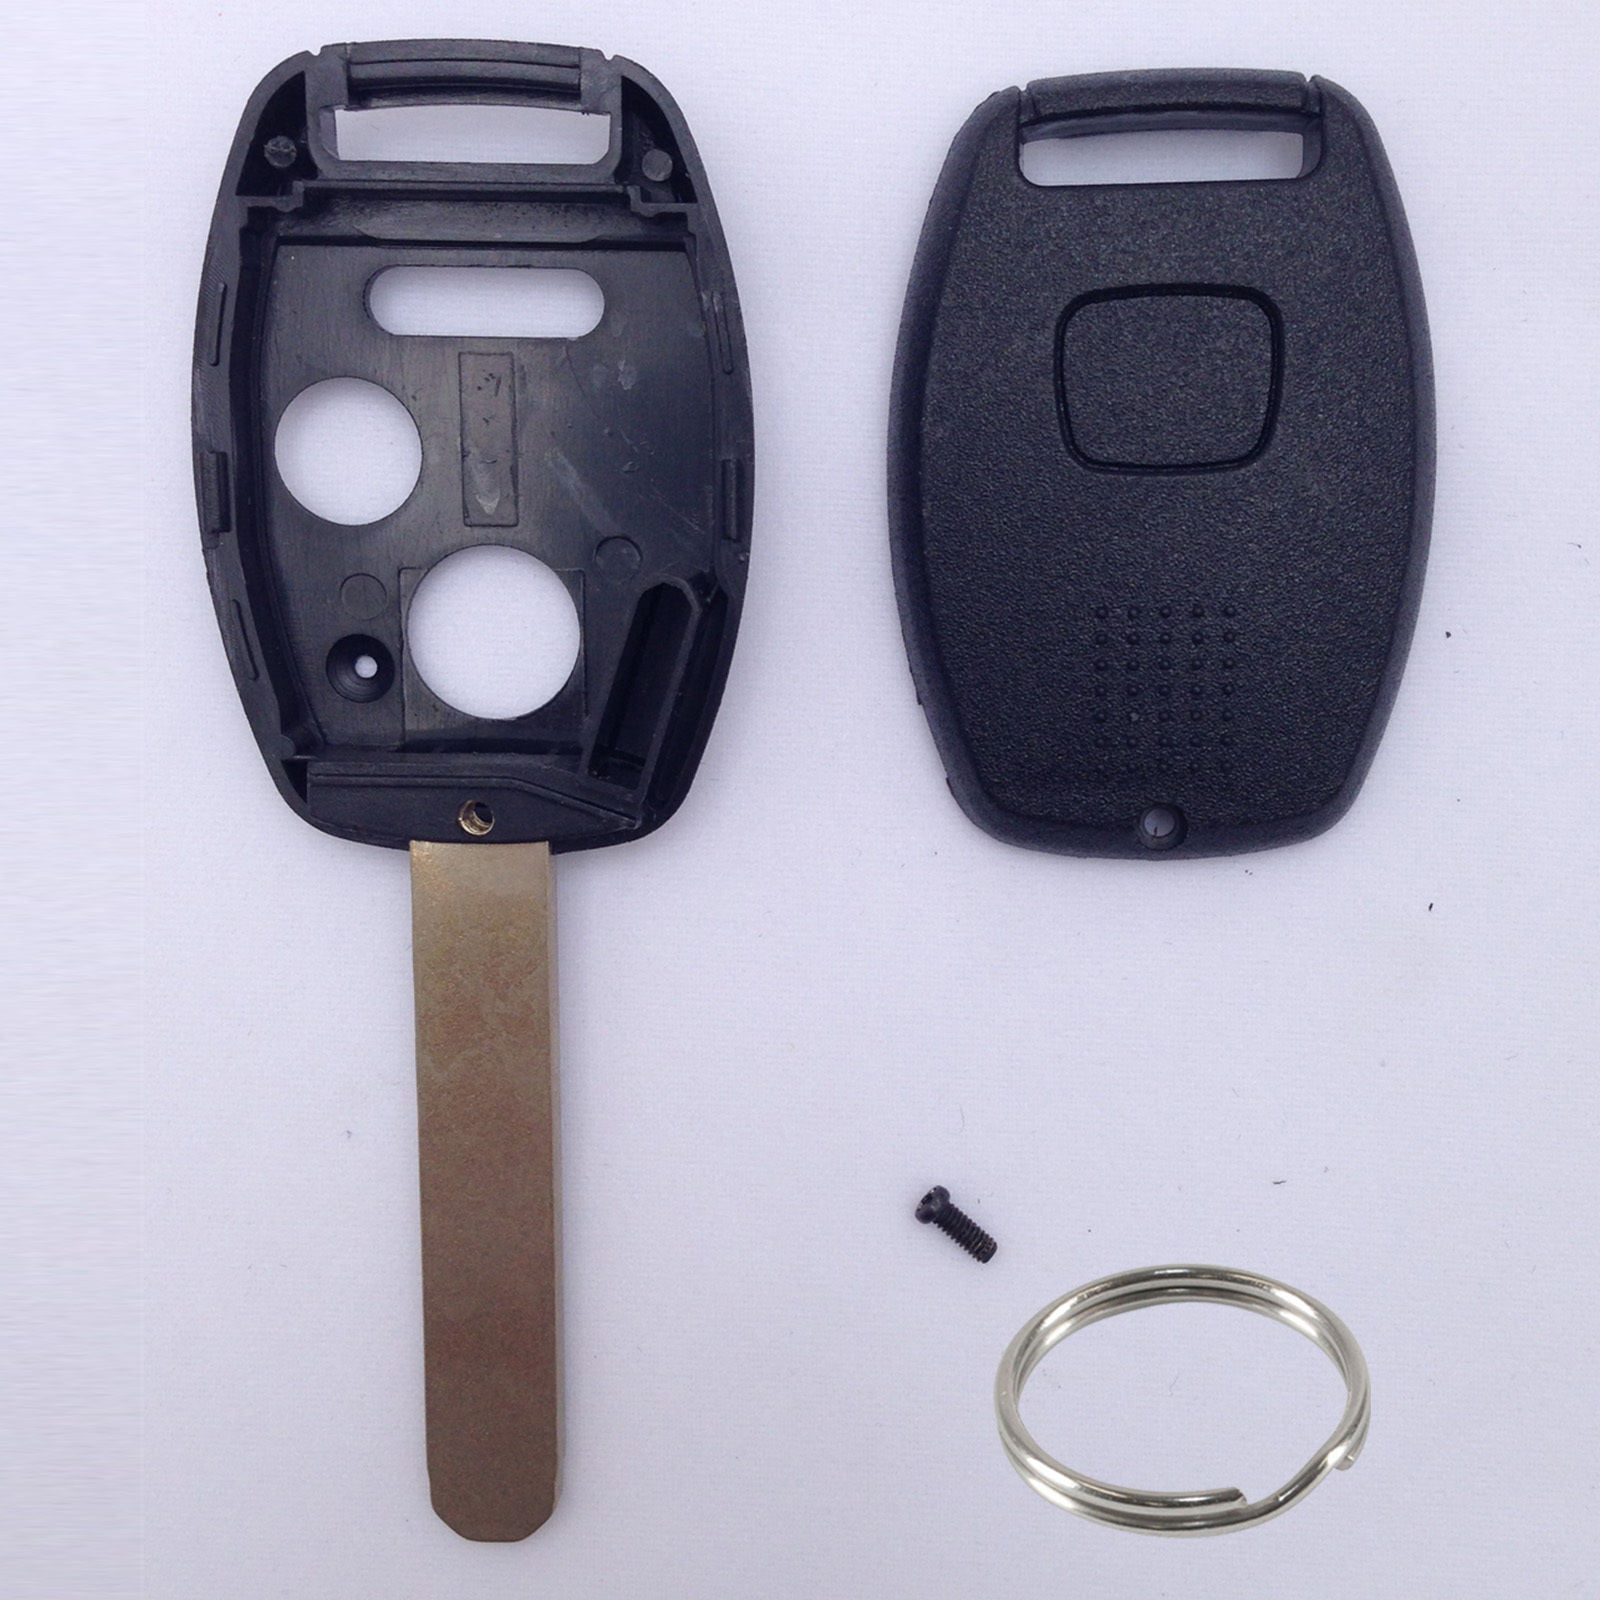 2 Replacement For 2005 2006 2007 2008 Honda Pilot Key Fob Remote Case Shell